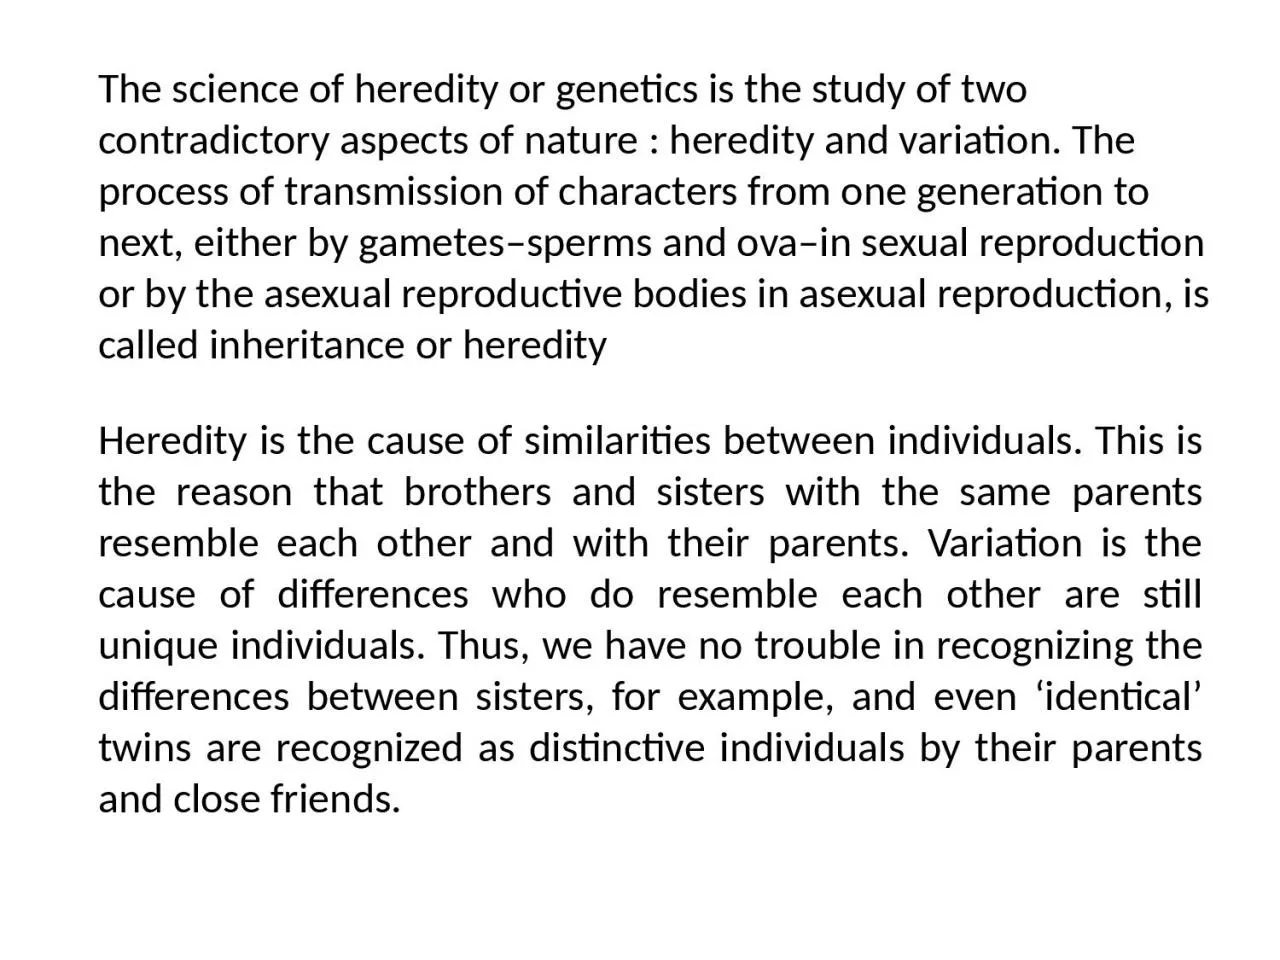 The science of heredity or genetics is the study of two contradictory aspects of nature